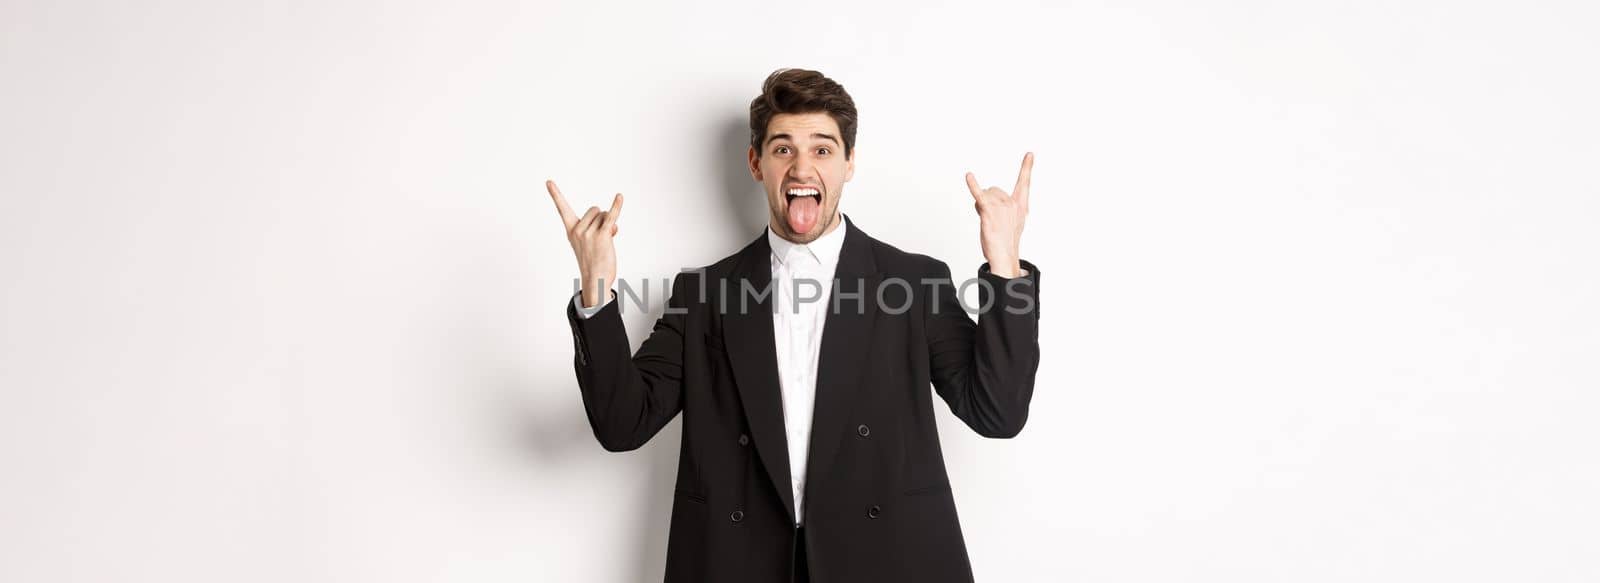 Portrait of happy attractive guy having fun at party, wearing black suit, showing rock-n-roll sign and tongue, standing excited against white background.